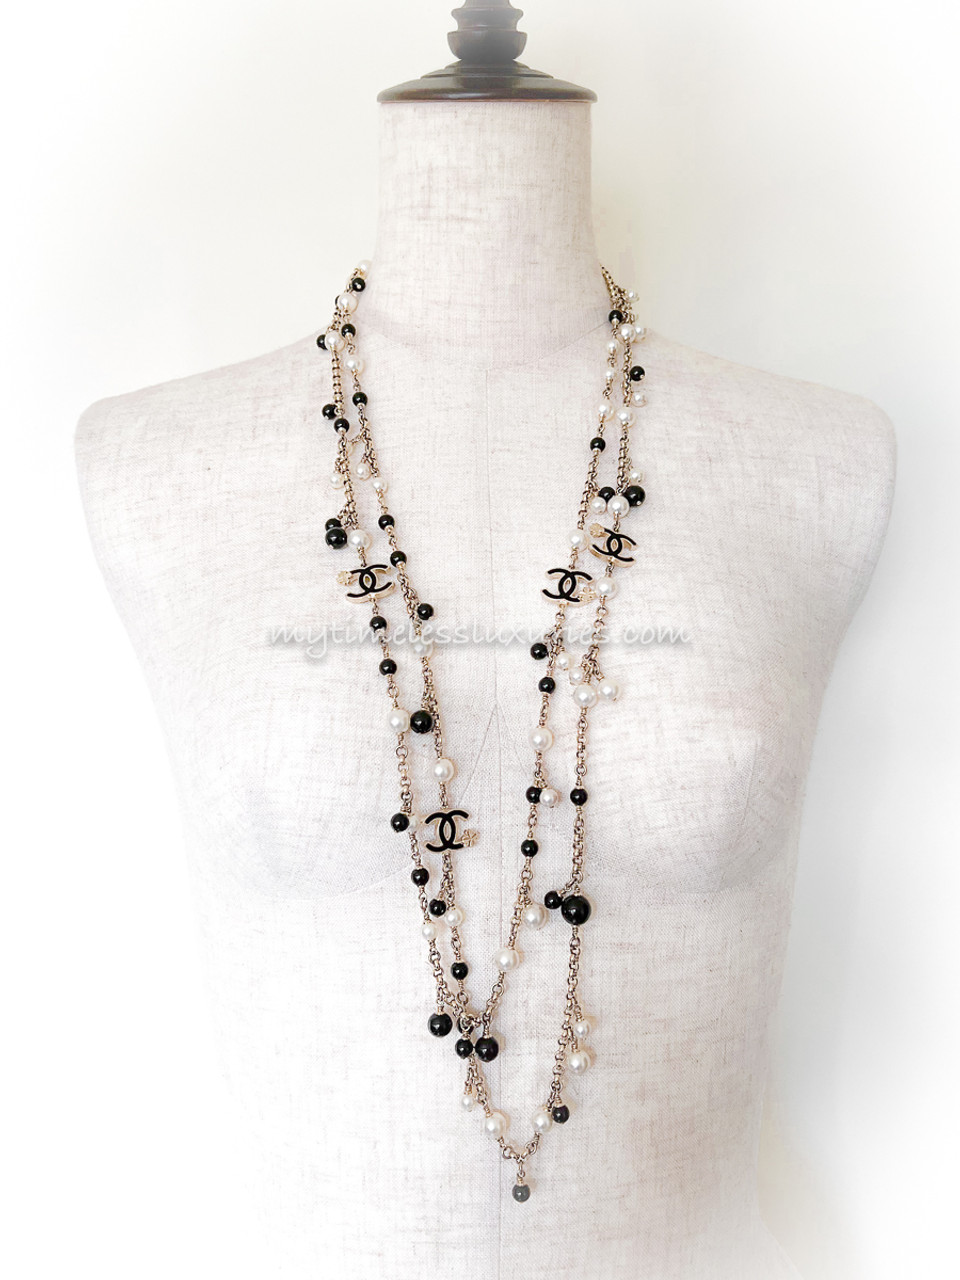 Chanel Glass Beads Pearl Embellished Draped Chain Necklace